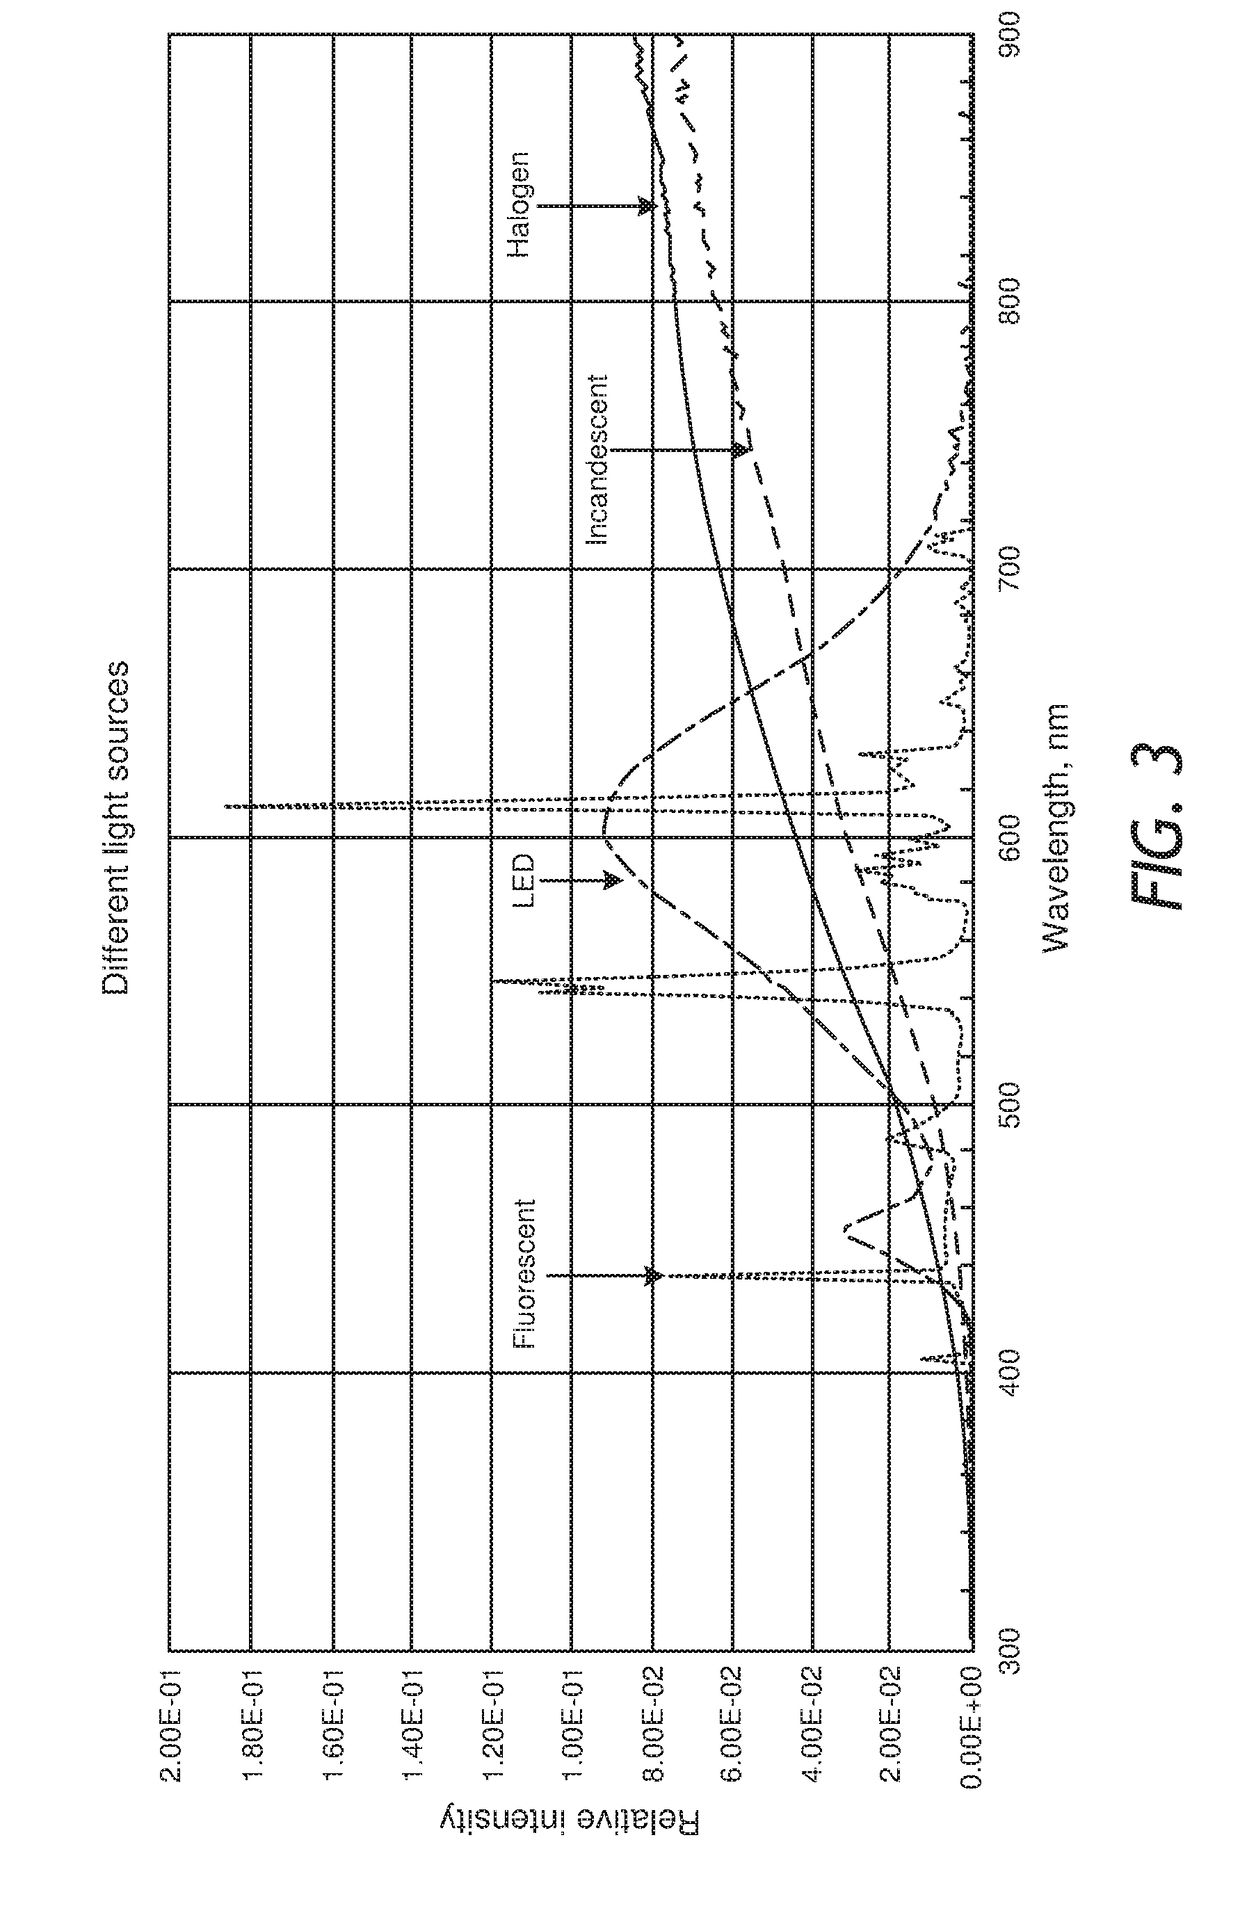 Cosmetic compositions capable of producing localized surface plasmonic resonance in response to indoor and/or outdoor lighting sources